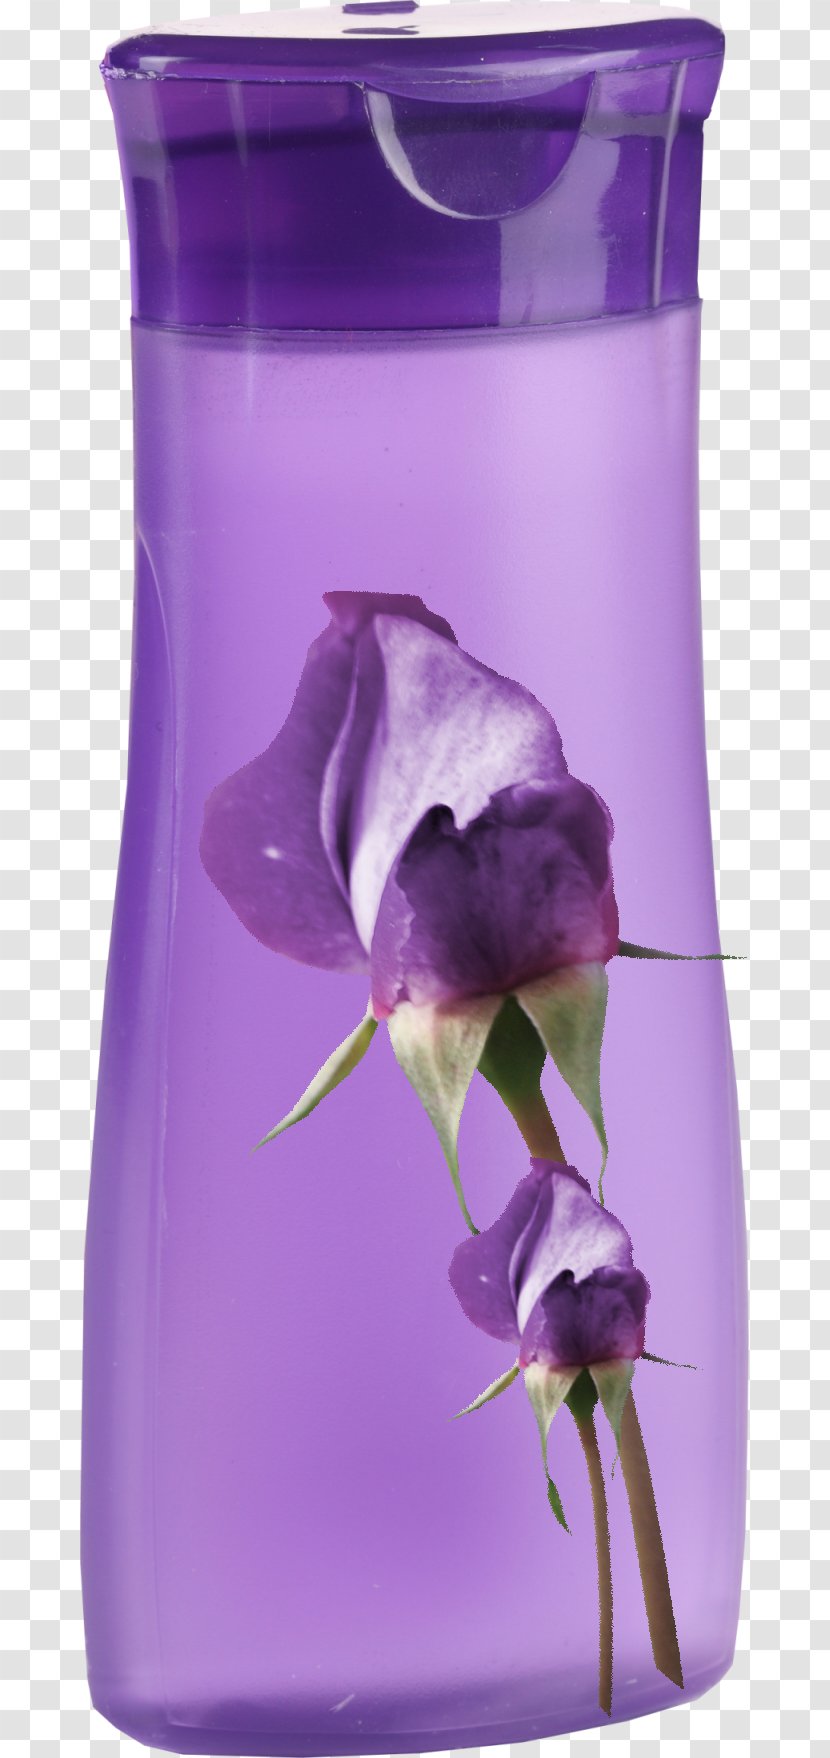 Purple Shower Gel - Vase - Material Free To Pull Transparent PNG